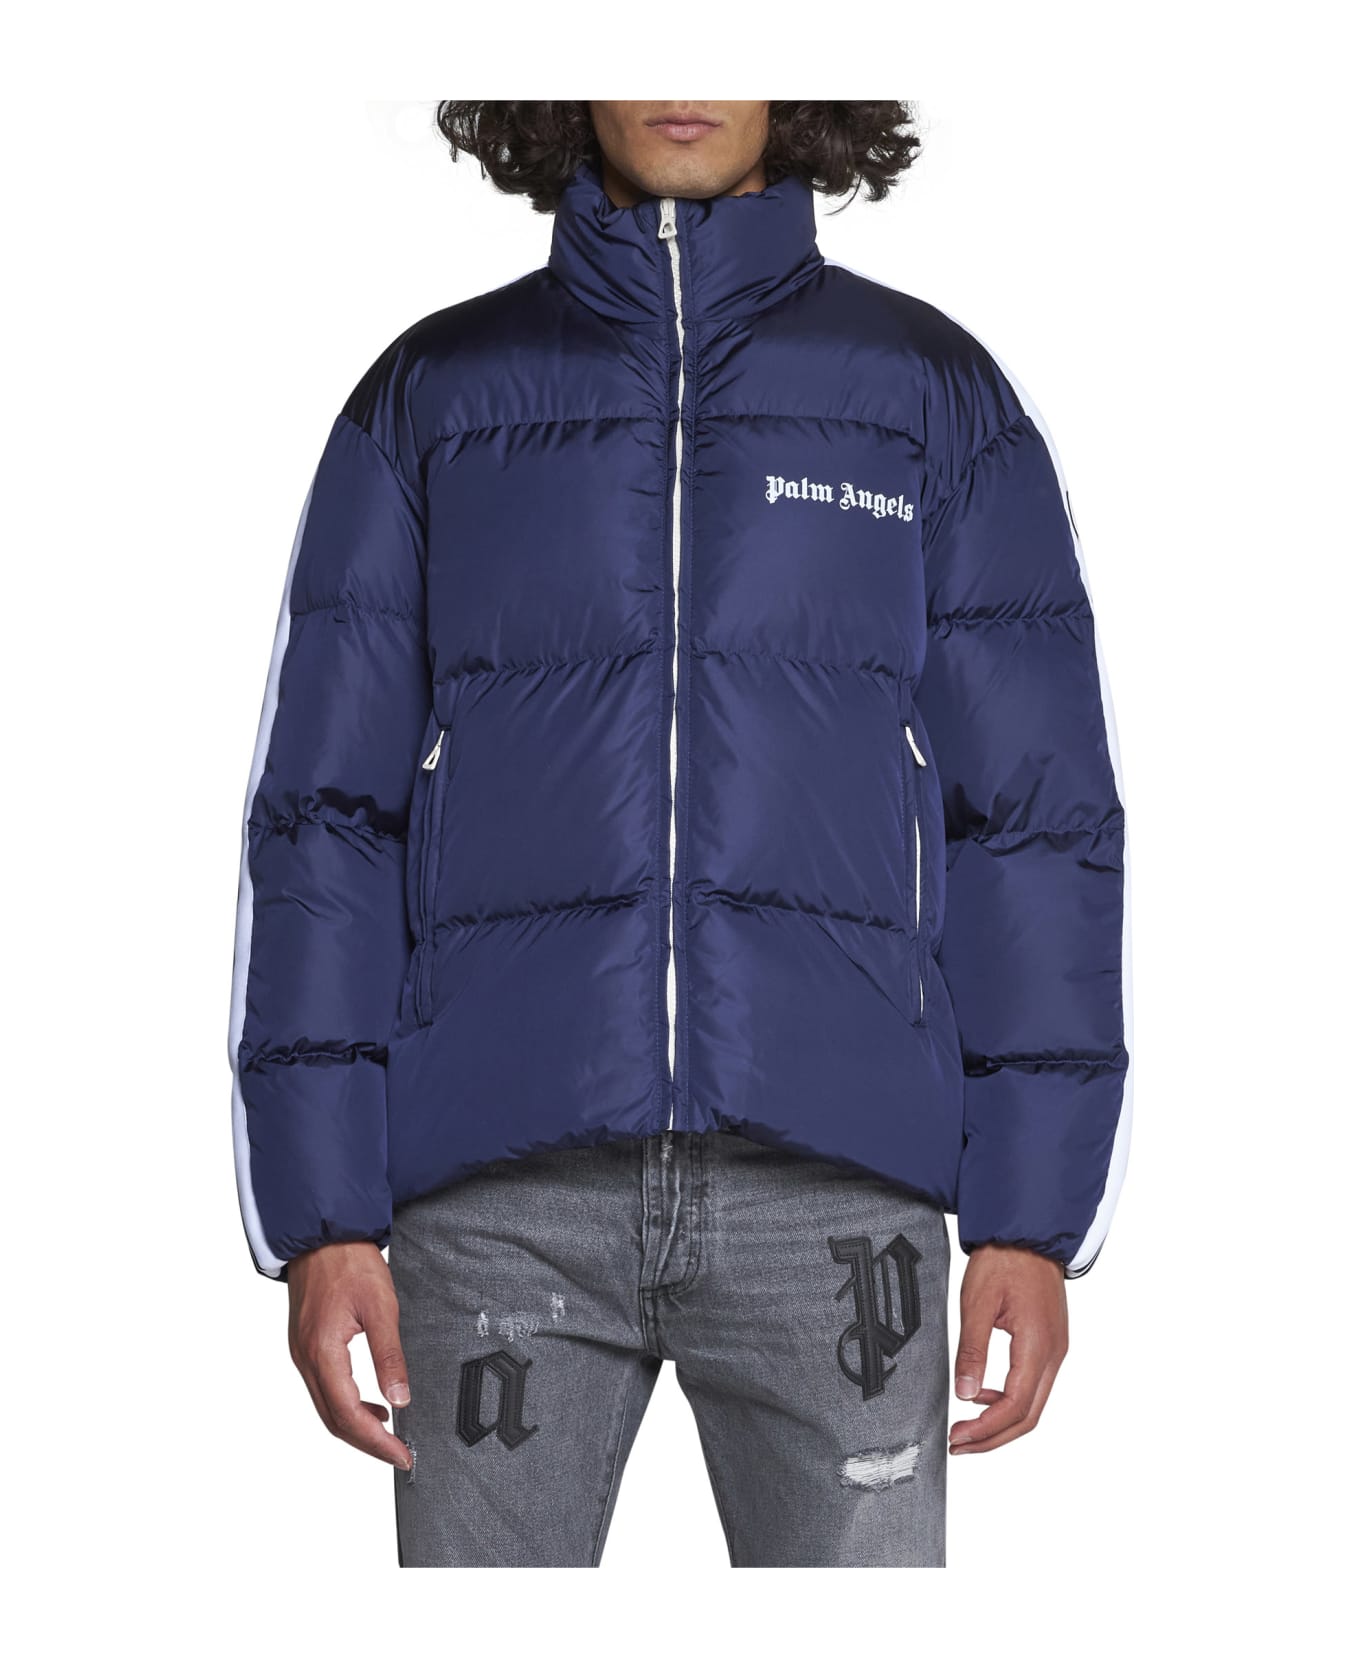 Palm Angels Down Jacket - Navy blue white